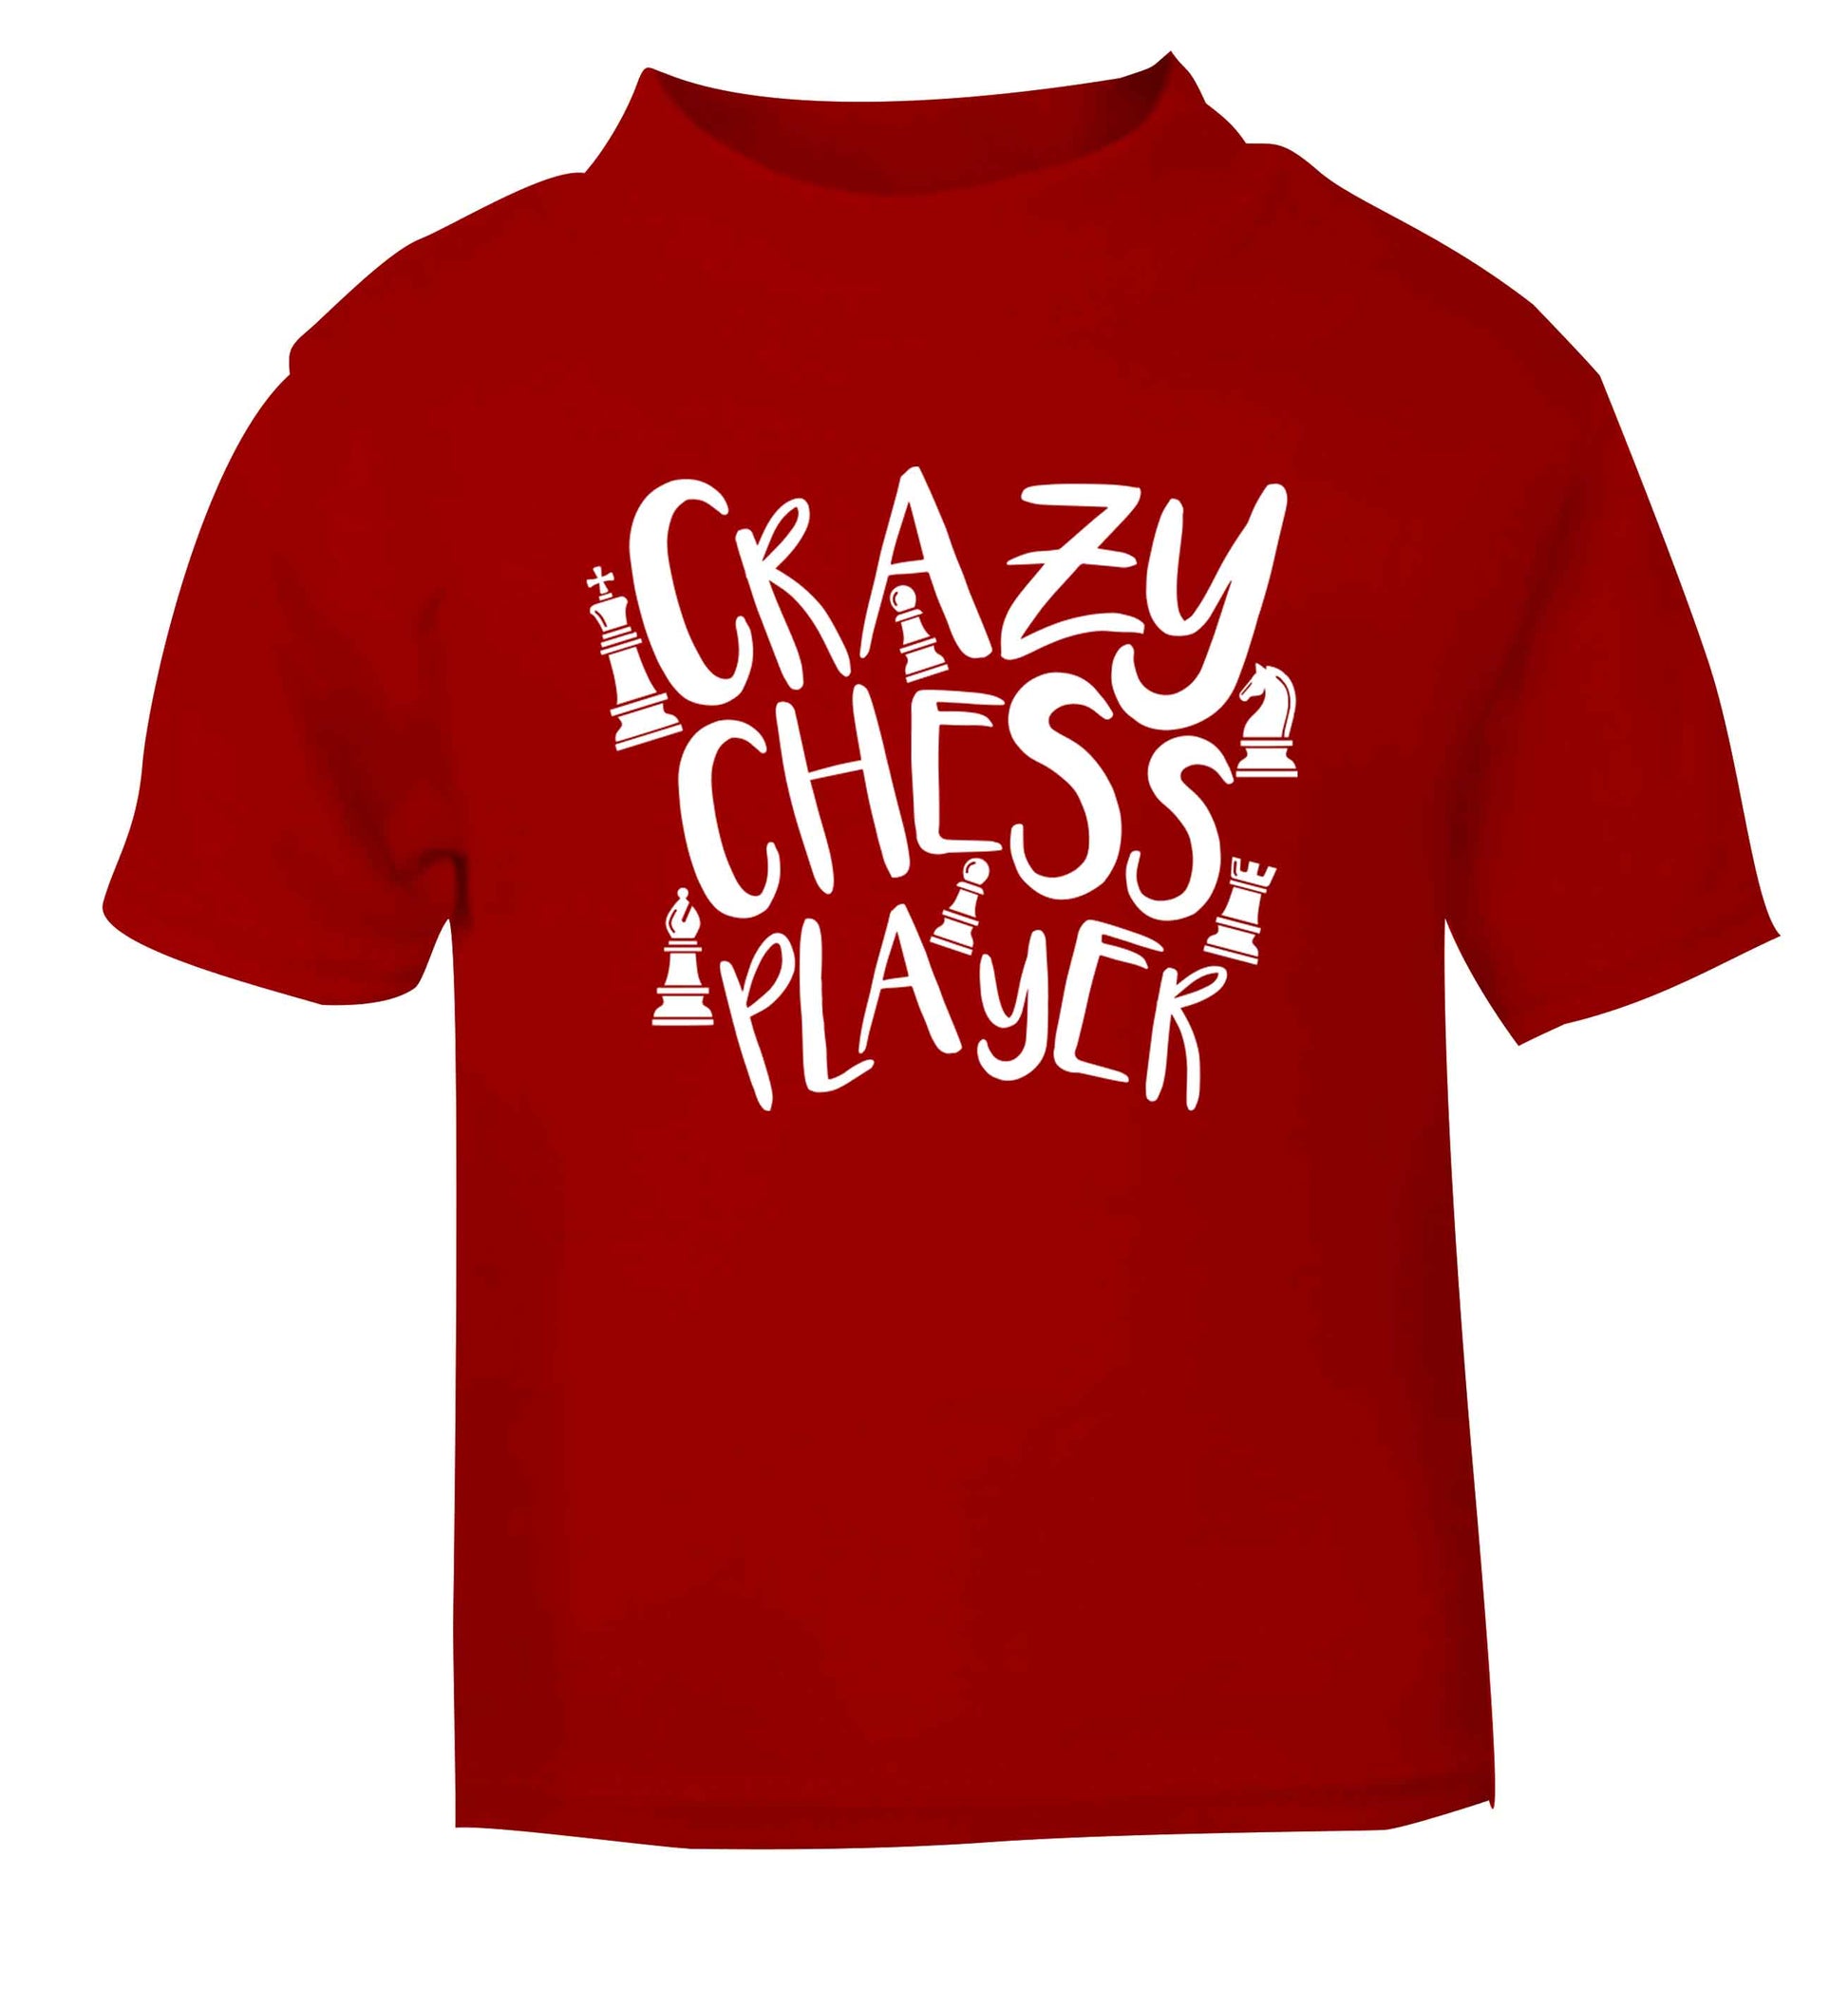 Crazy chess player red Baby Toddler Tshirt 2 Years